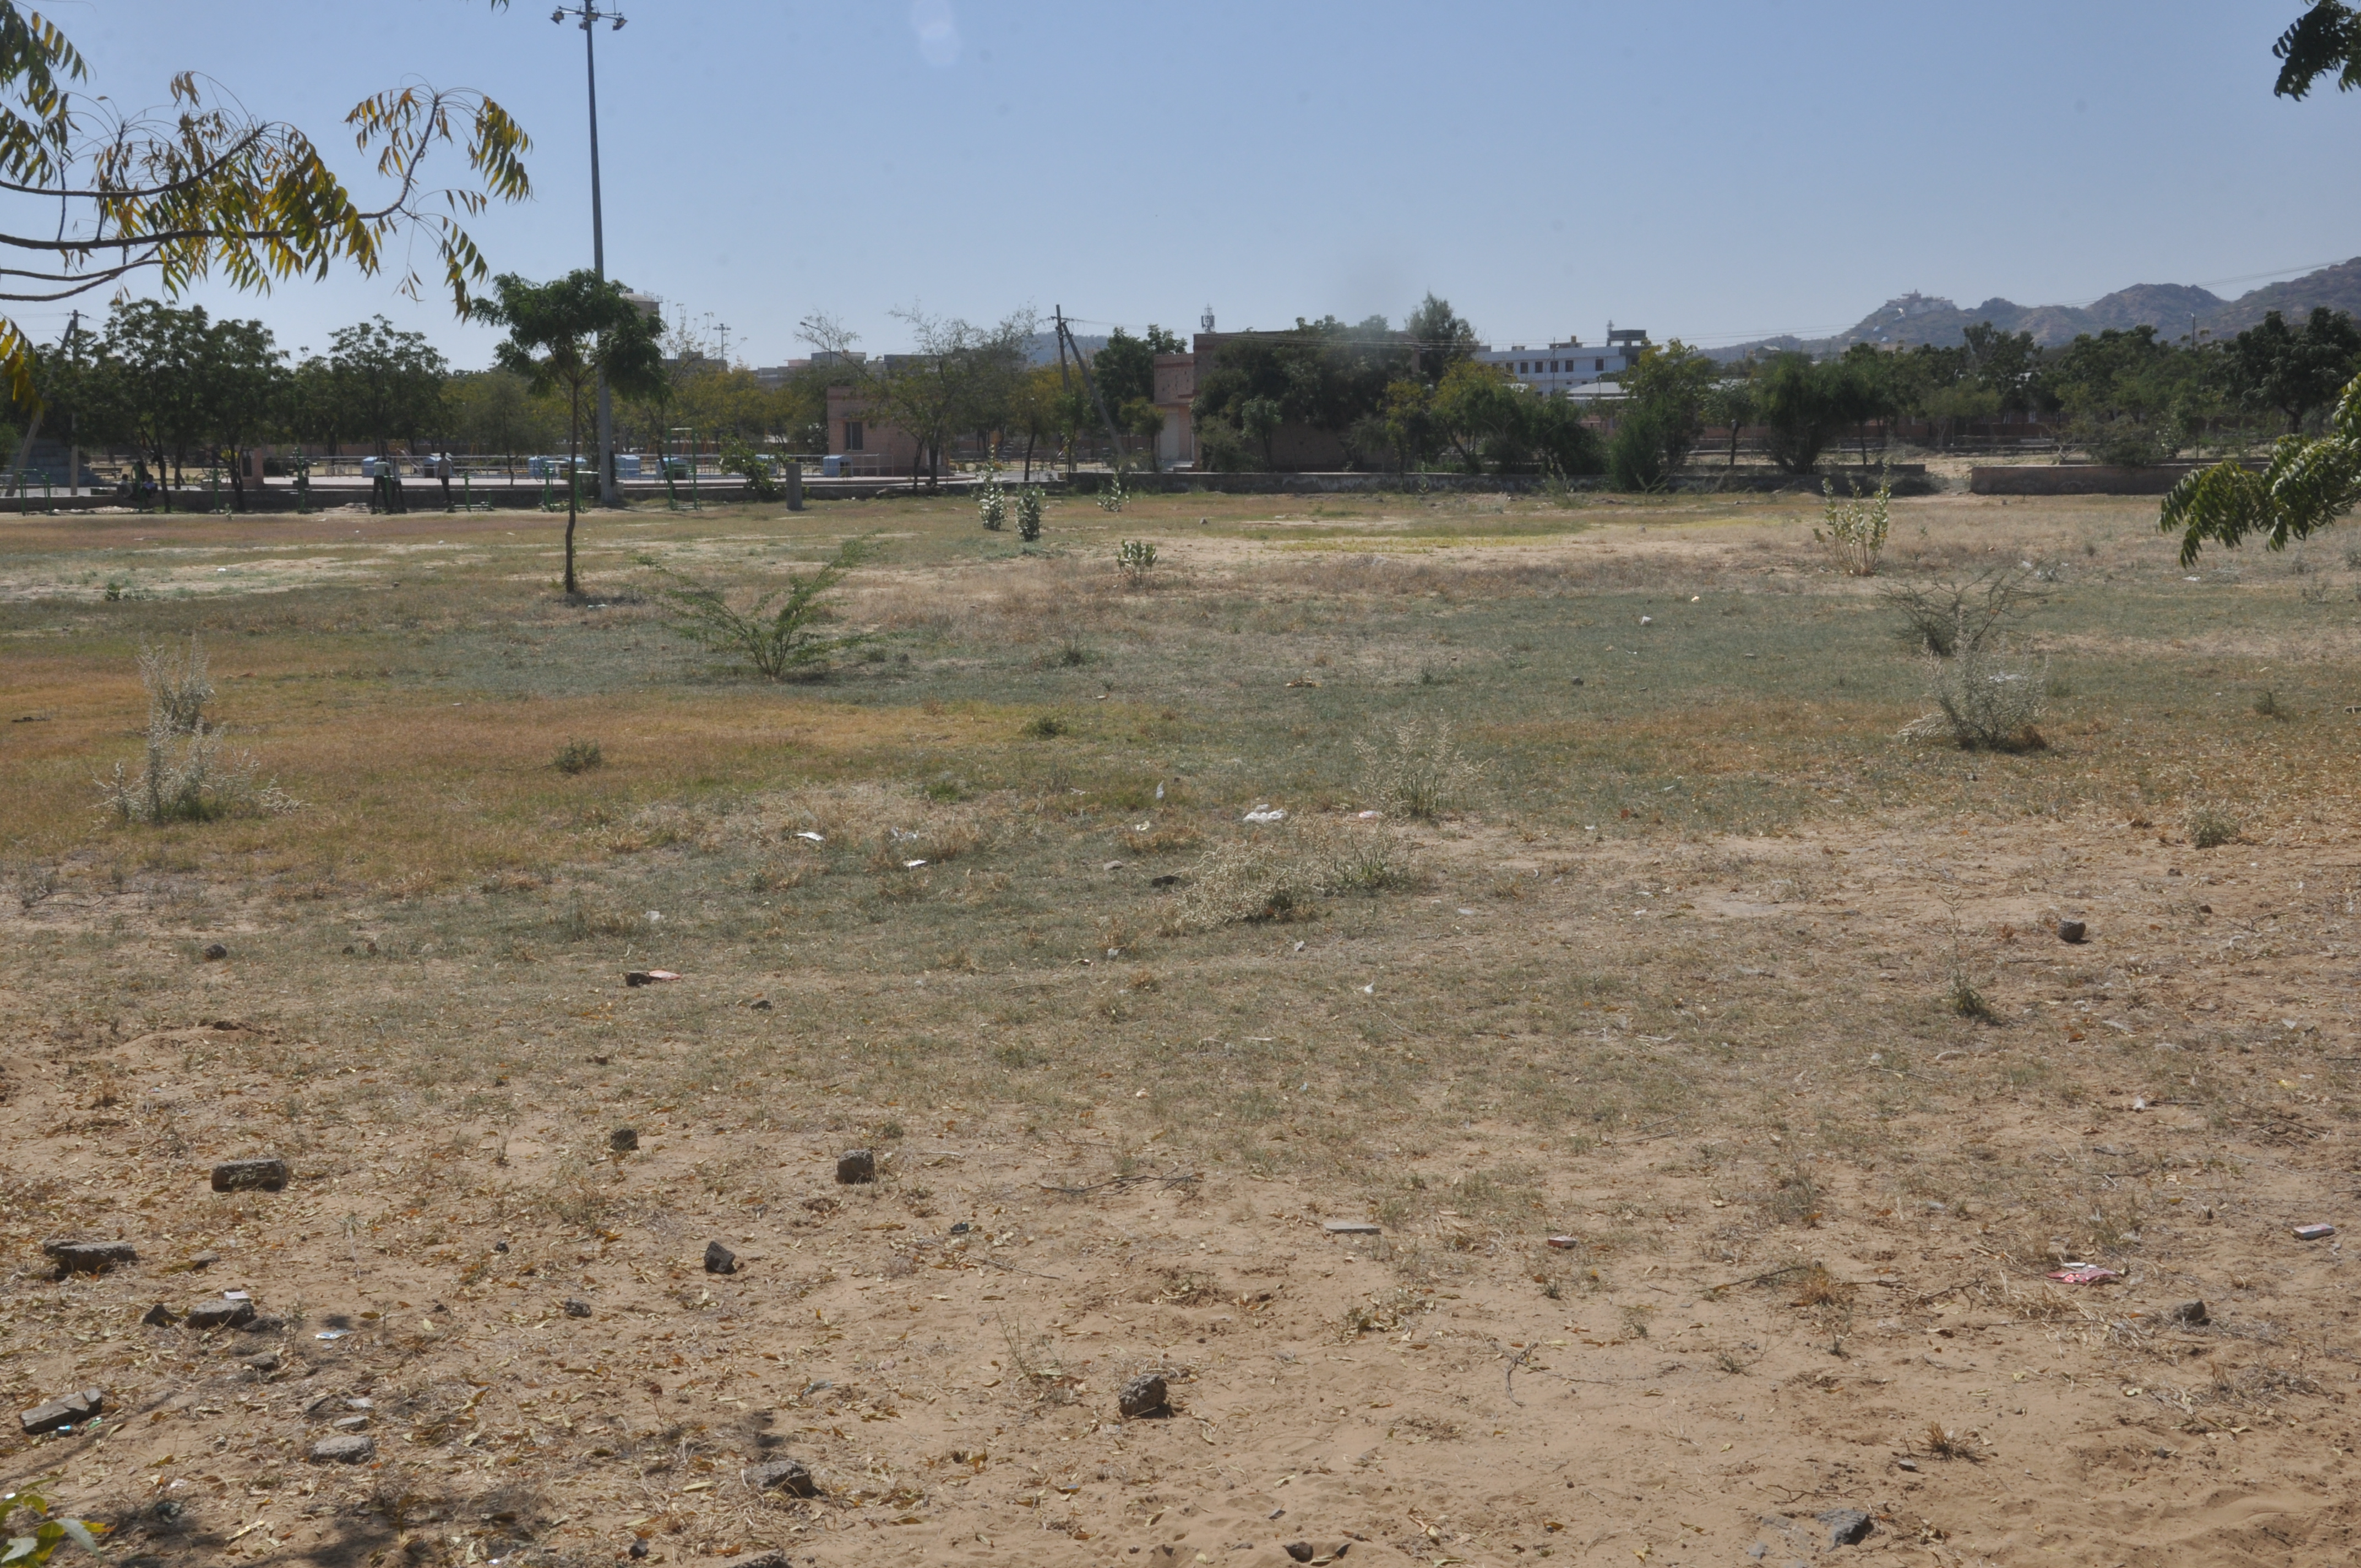 Due to lack of care, dilapidated park